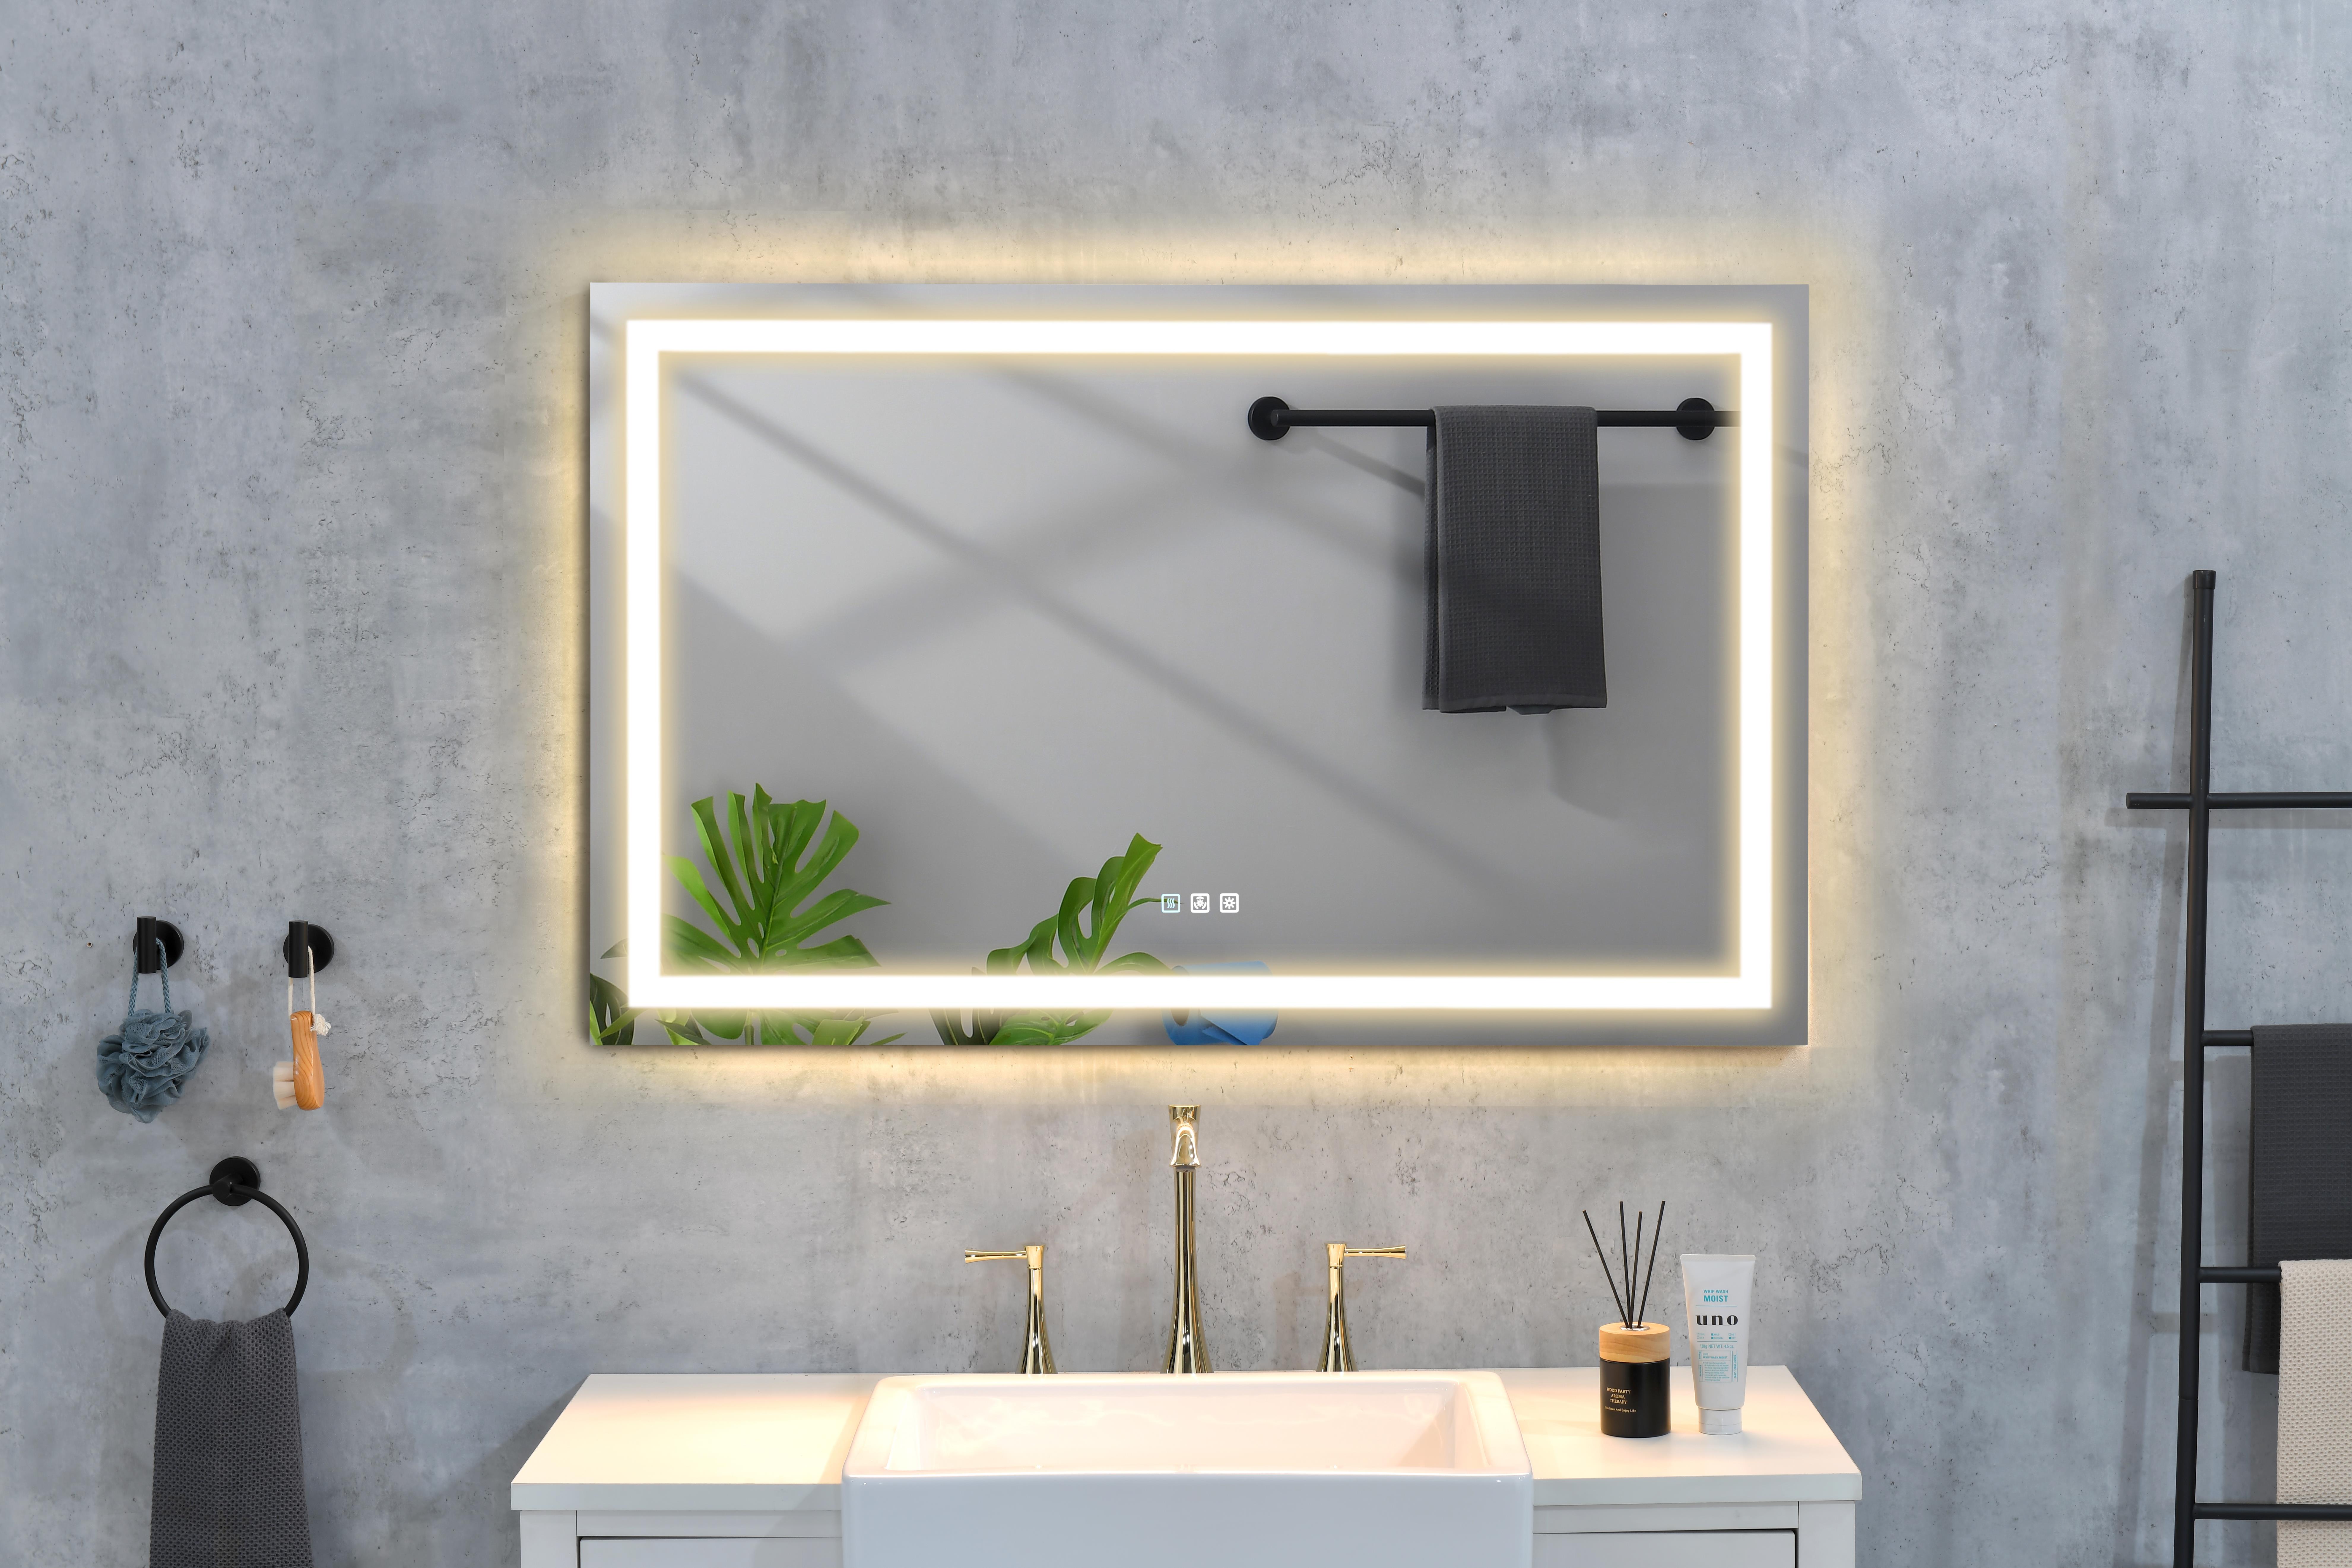 42x 24 Inch LED Mirror Bathroom Vanity Mirrors with Lights, Wall Mounted Anti-Fog Memory Large Dimmable Front Light Makeup Mirror-CASAINC